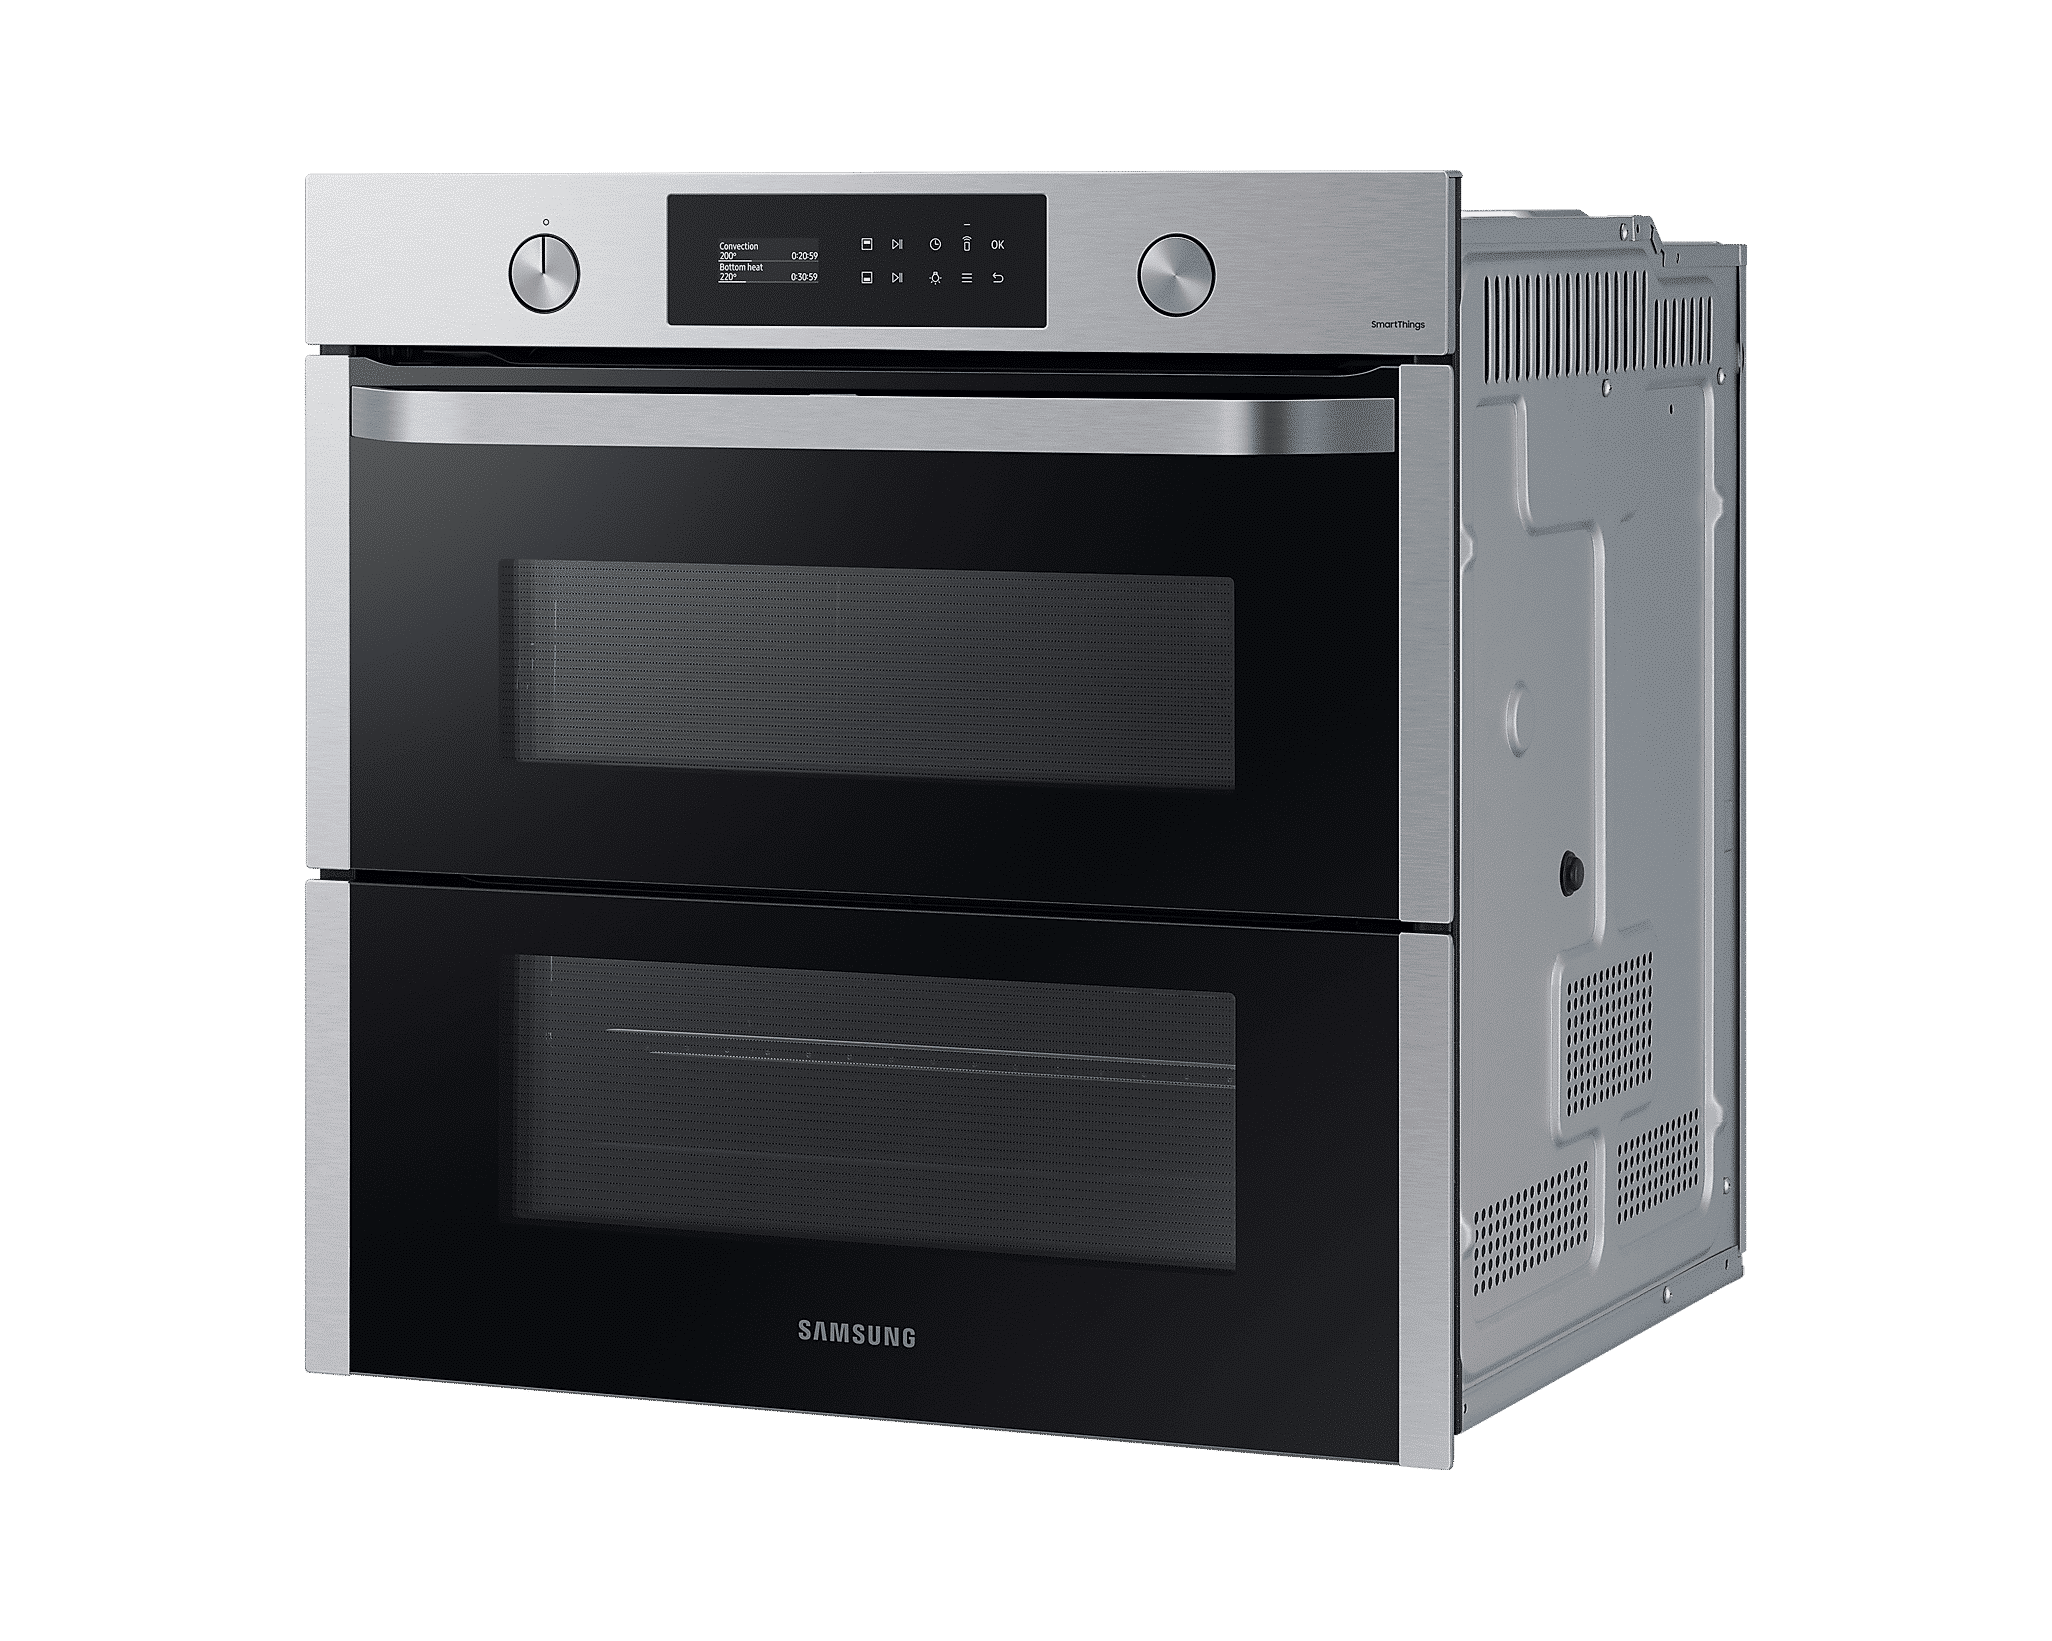 Samsung NV75A6679RS Wifi Dual Cook Flex Oven, Pyrolytic Cleaning, Stainless Steel-1232